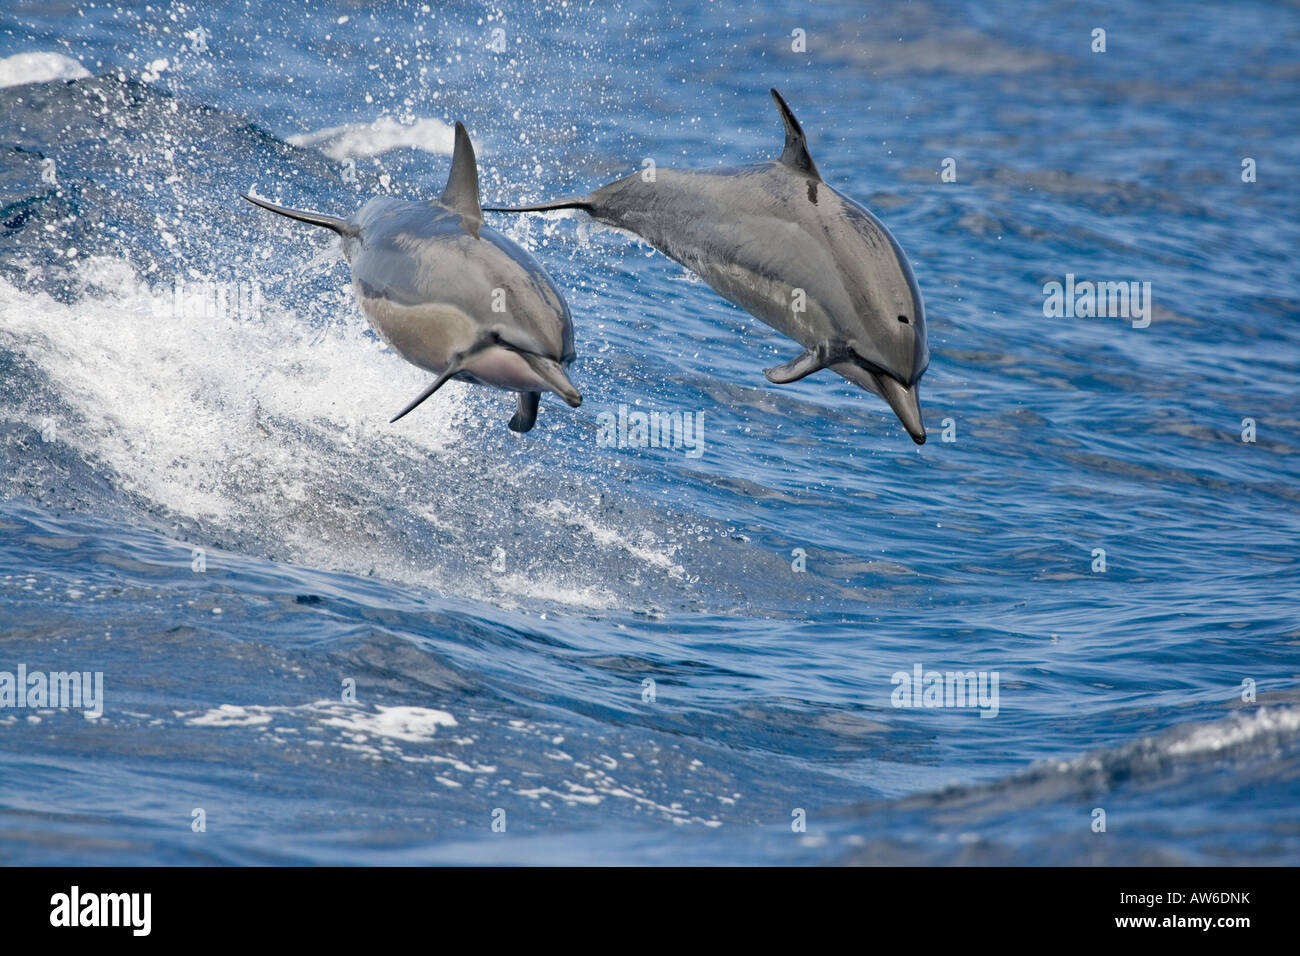 Spinner dolphin, Stenella longirostris, leap into the Pacific air at the same time, Hawaii. Stock Photo